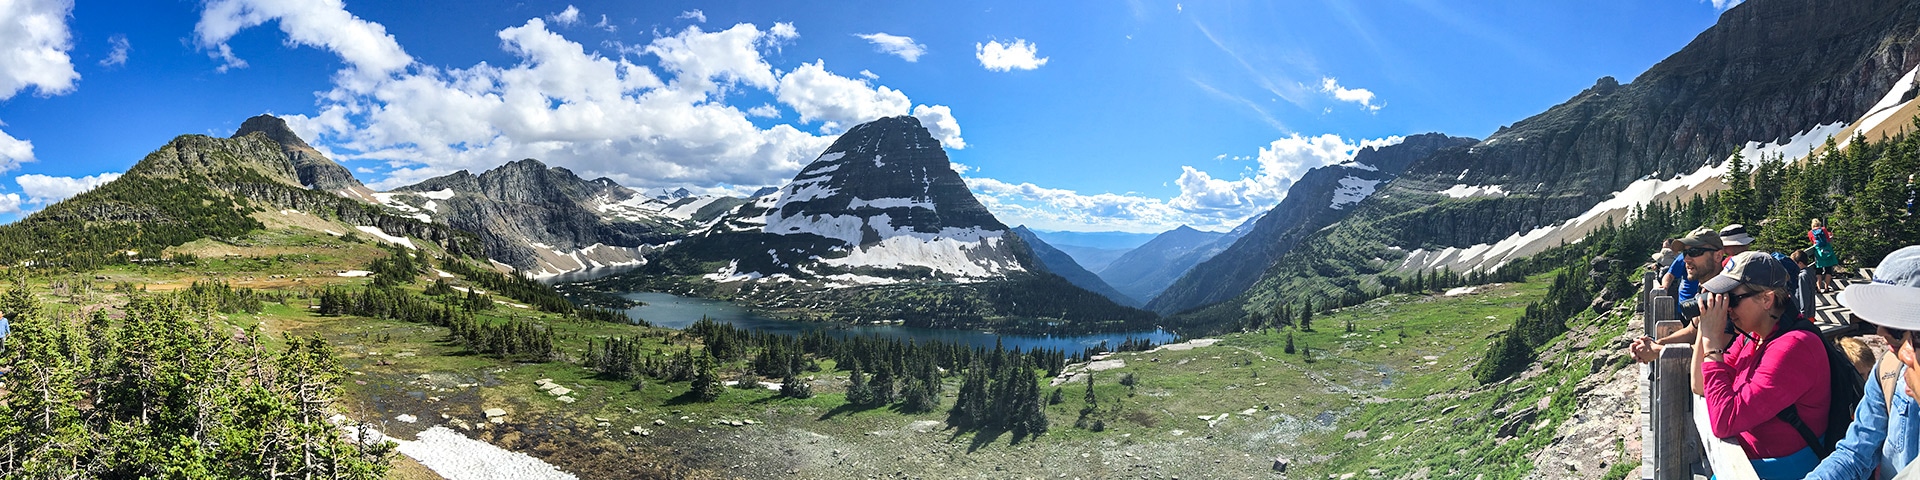 Day-hikes in Glacier National Park, Montana